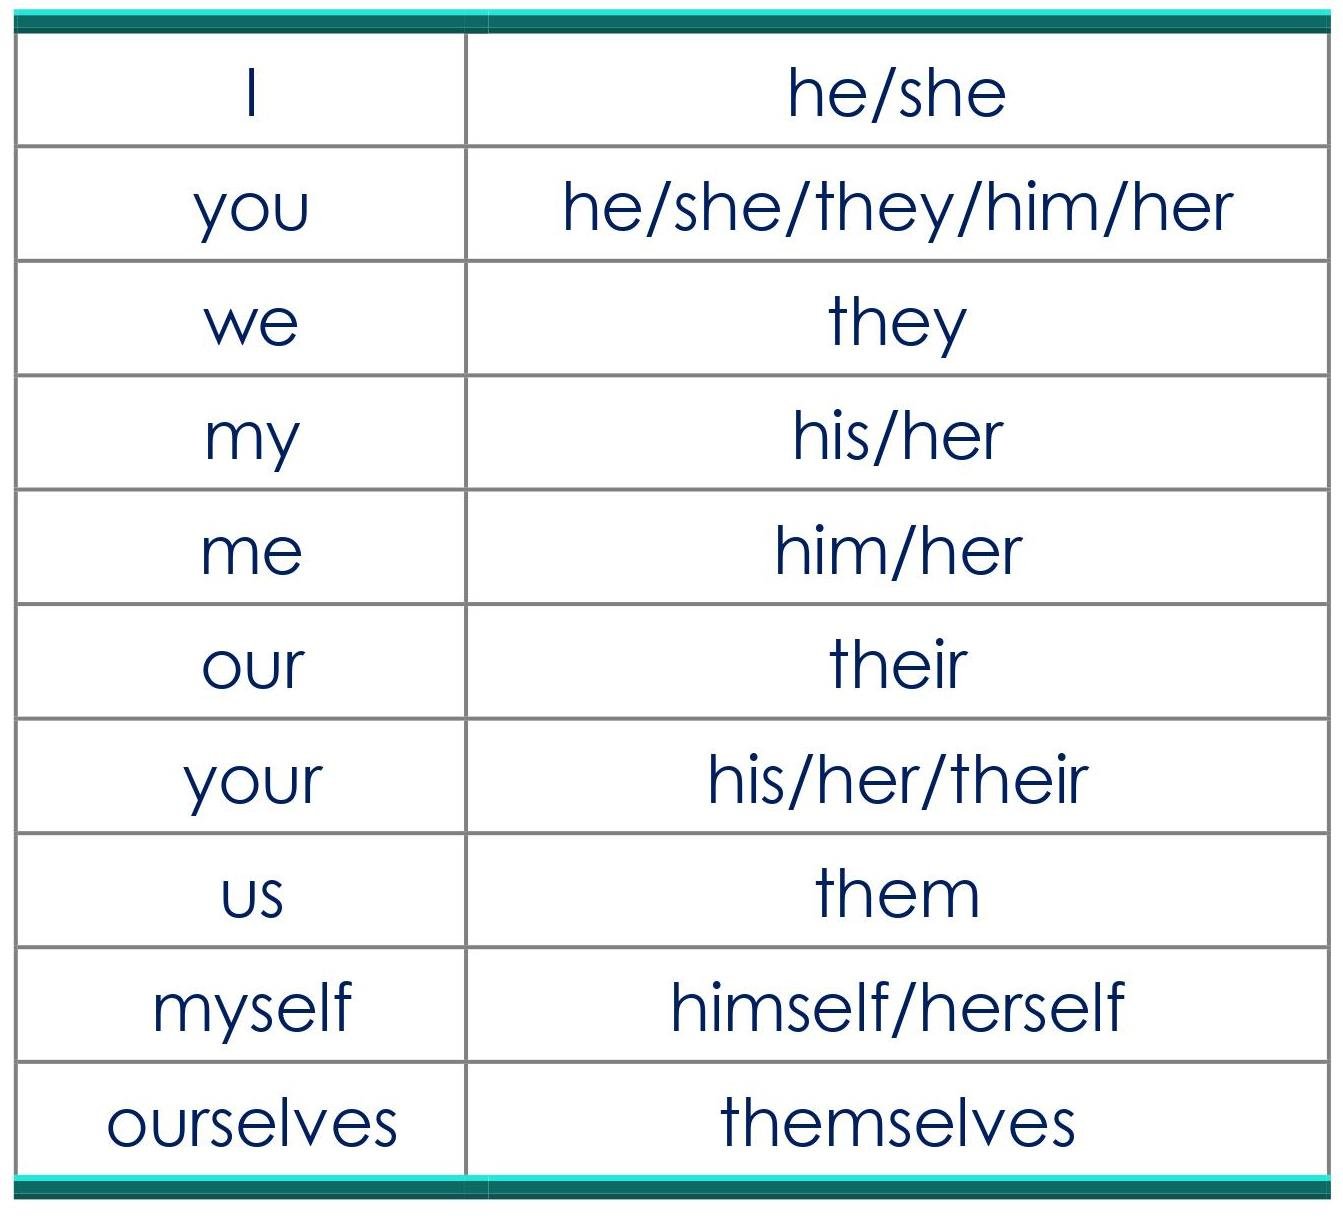 DIRECT INDIRECT SPEECH-CHANGE IN PRONOUNS